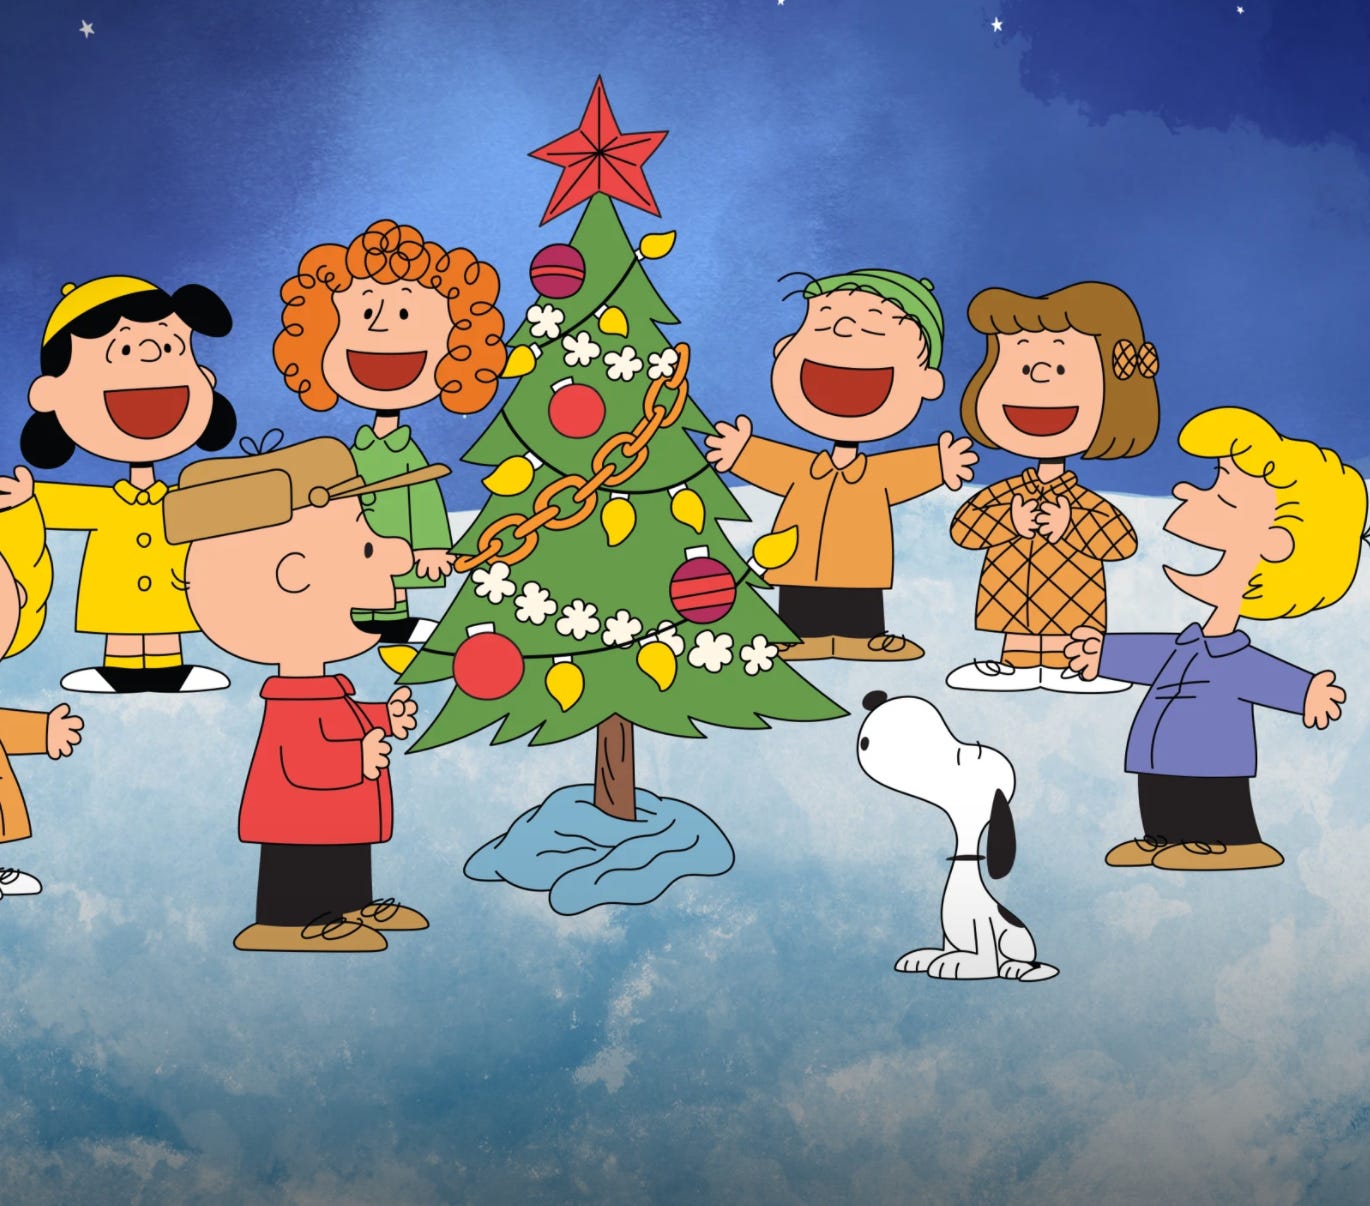 How to Watch and Stream 'A Charlie Brown Christmas' in 2021 for Free